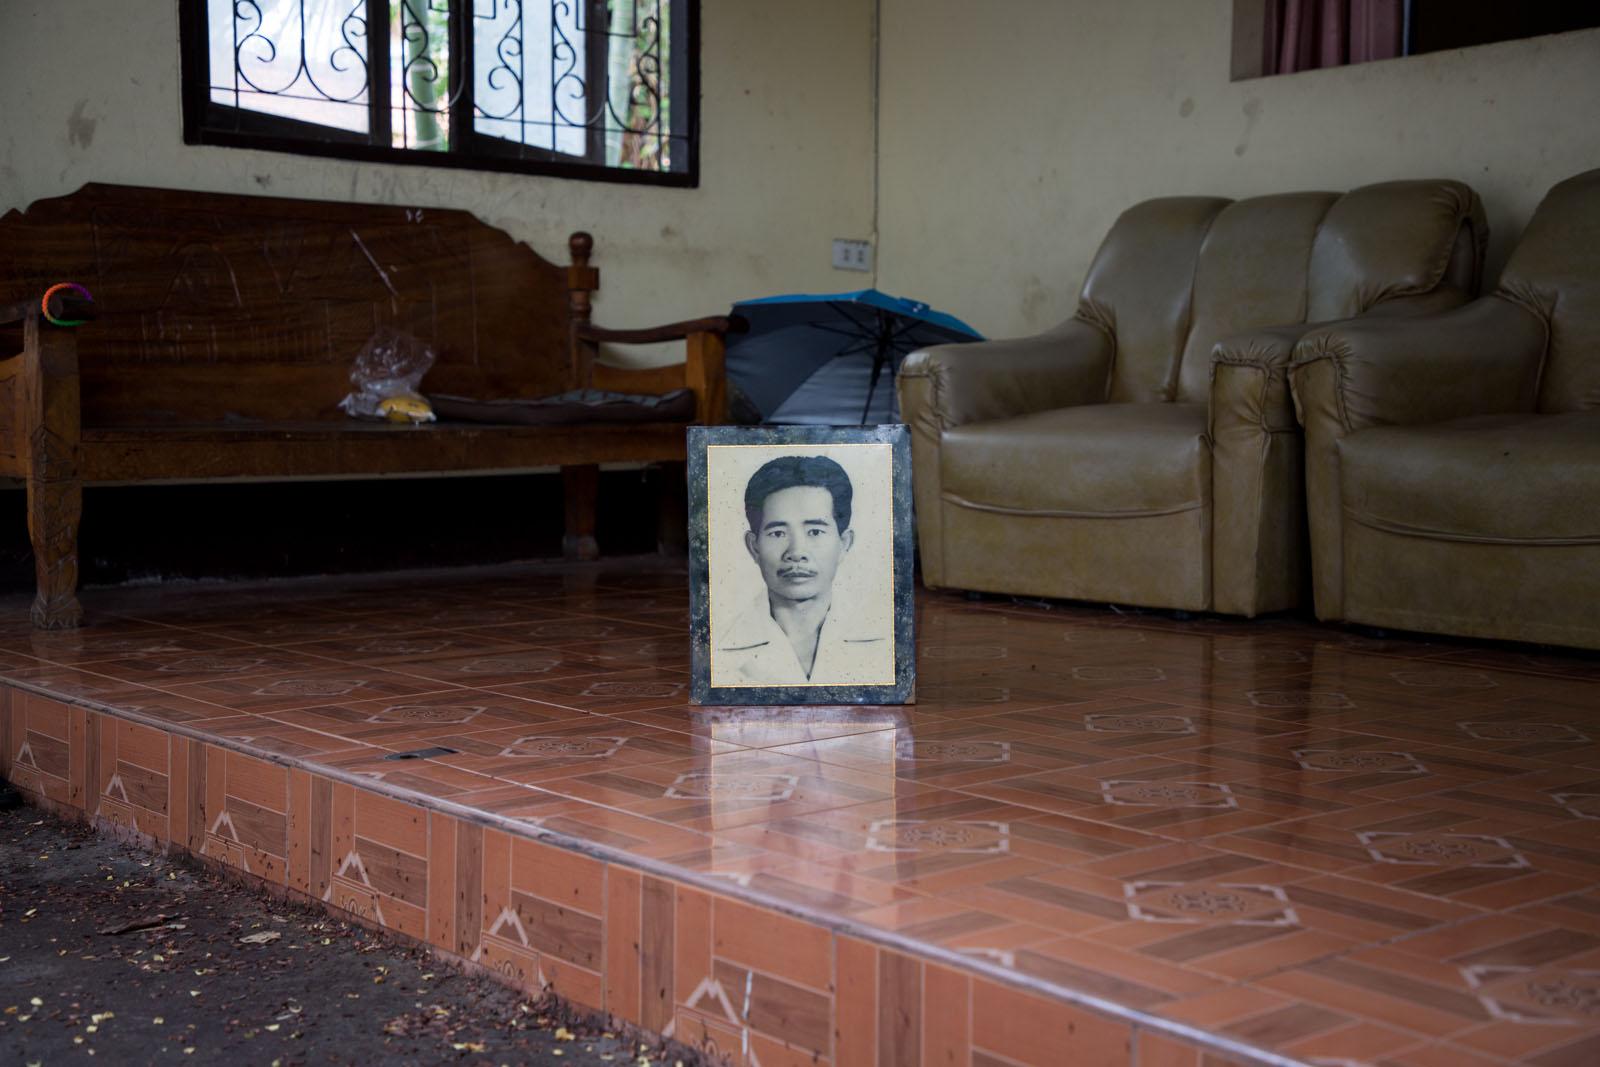 FOR THOSE WHO DIED TRYING - Inta Sriboonreung, Chairperson of Northern Peasant...